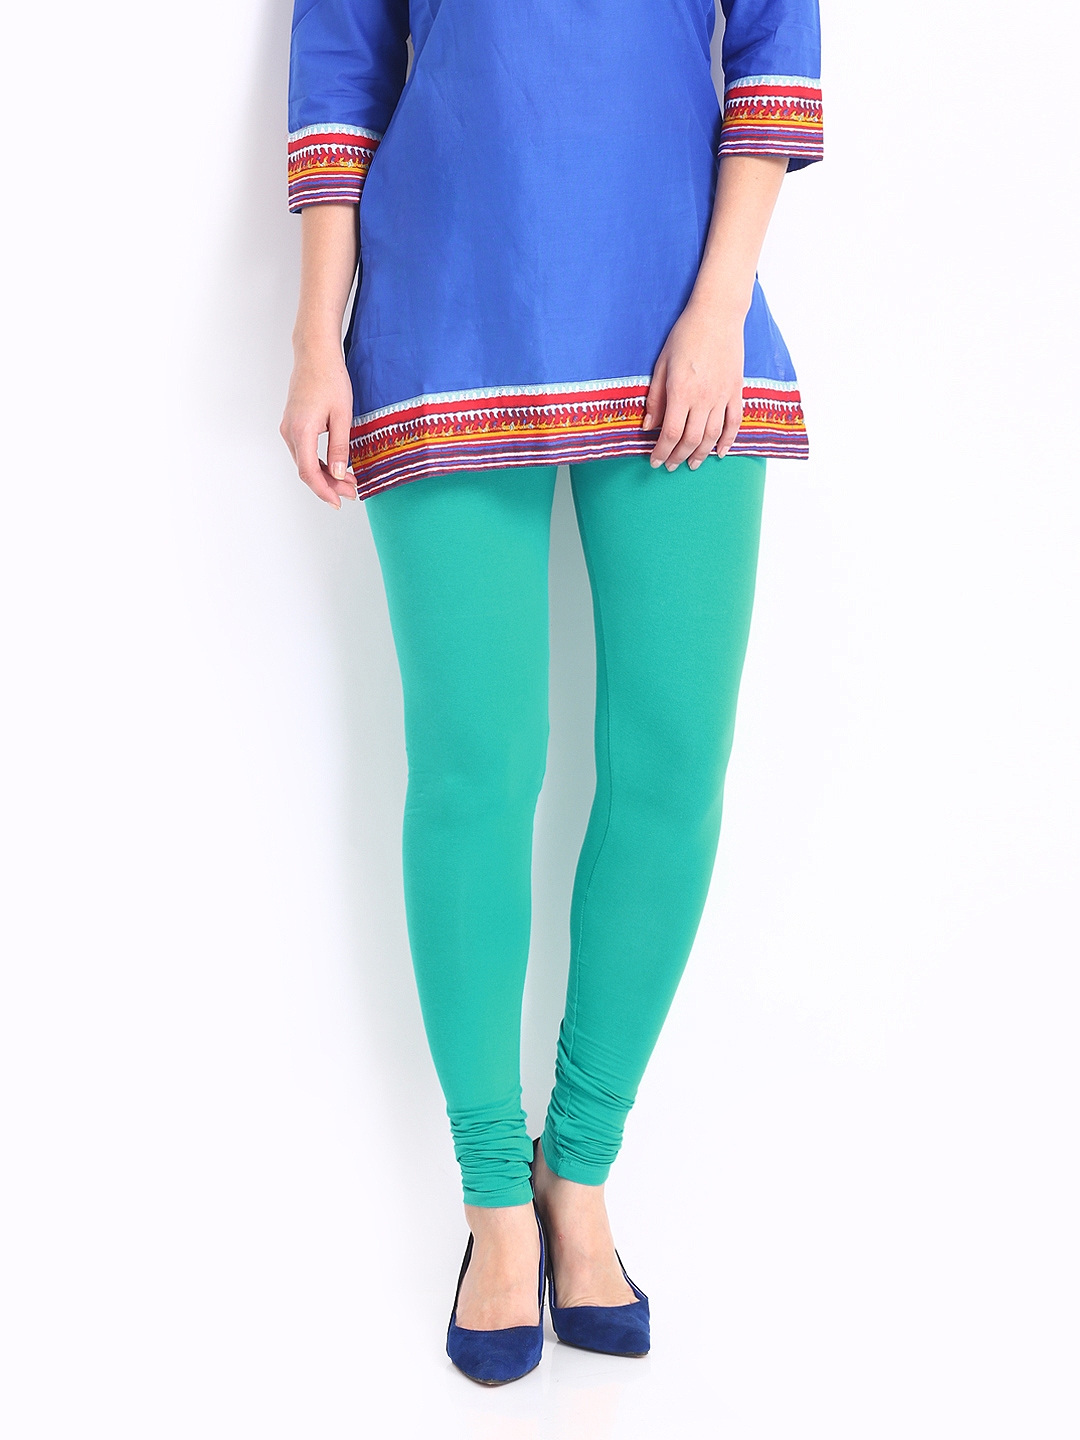 https://assets.myntassets.com/h_1440,q_100,w_1080/v1/images/style/properties/Go-Colors-Women-Teal-Green-Cotton-Stretch-Churidar-Leggings_50ab3648e78a7874885a091a63a9fa5a_images.jpg